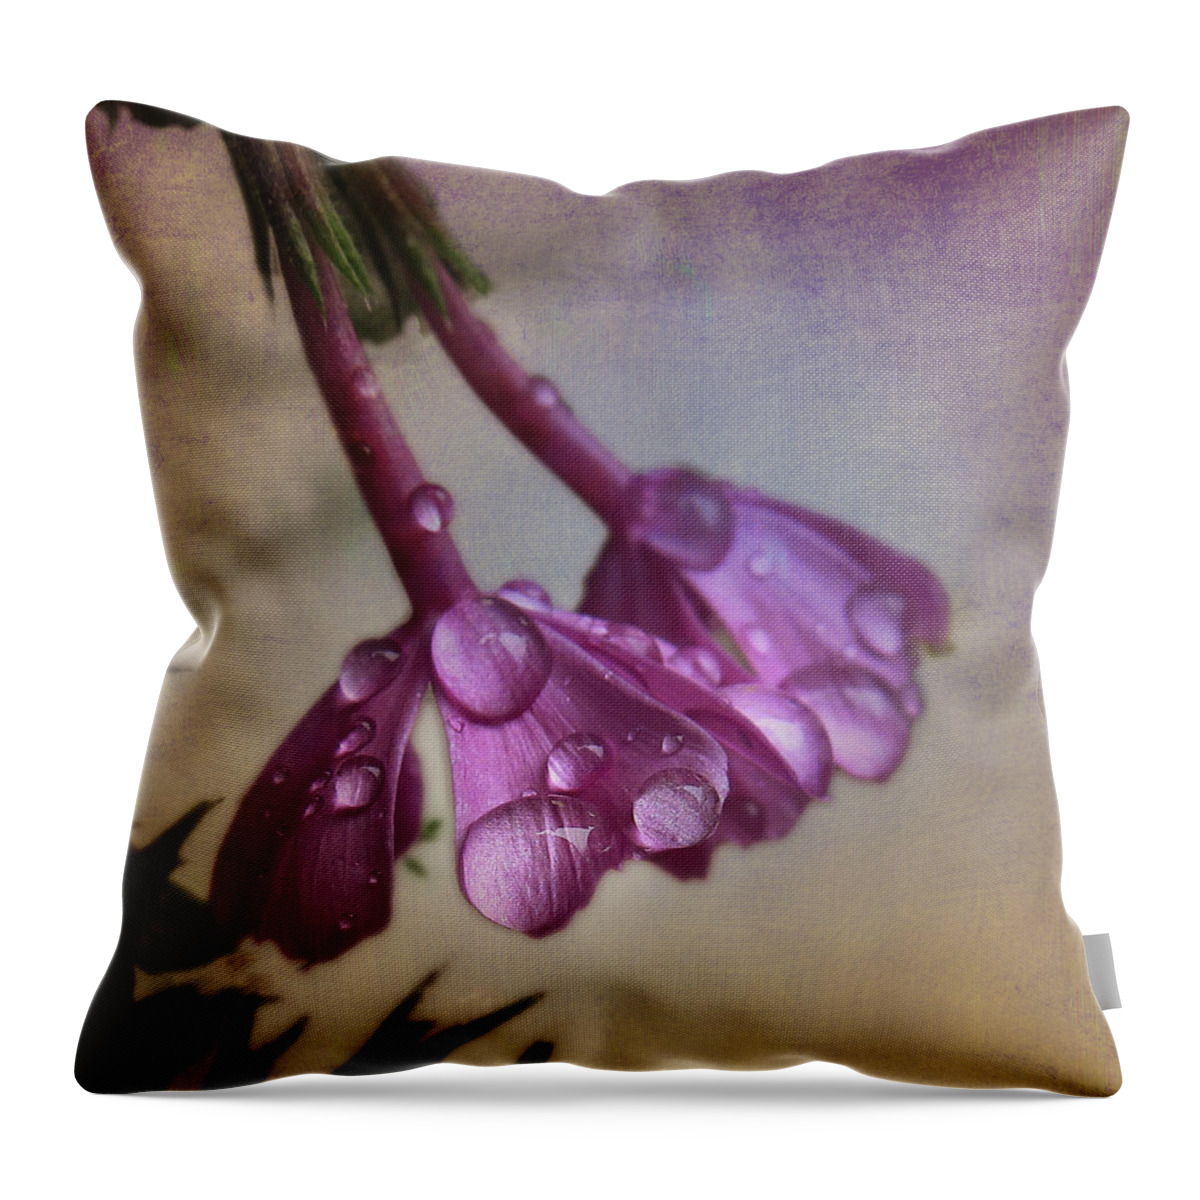  Throw Pillow featuring the photograph Pink Droplets by Deborah Smith